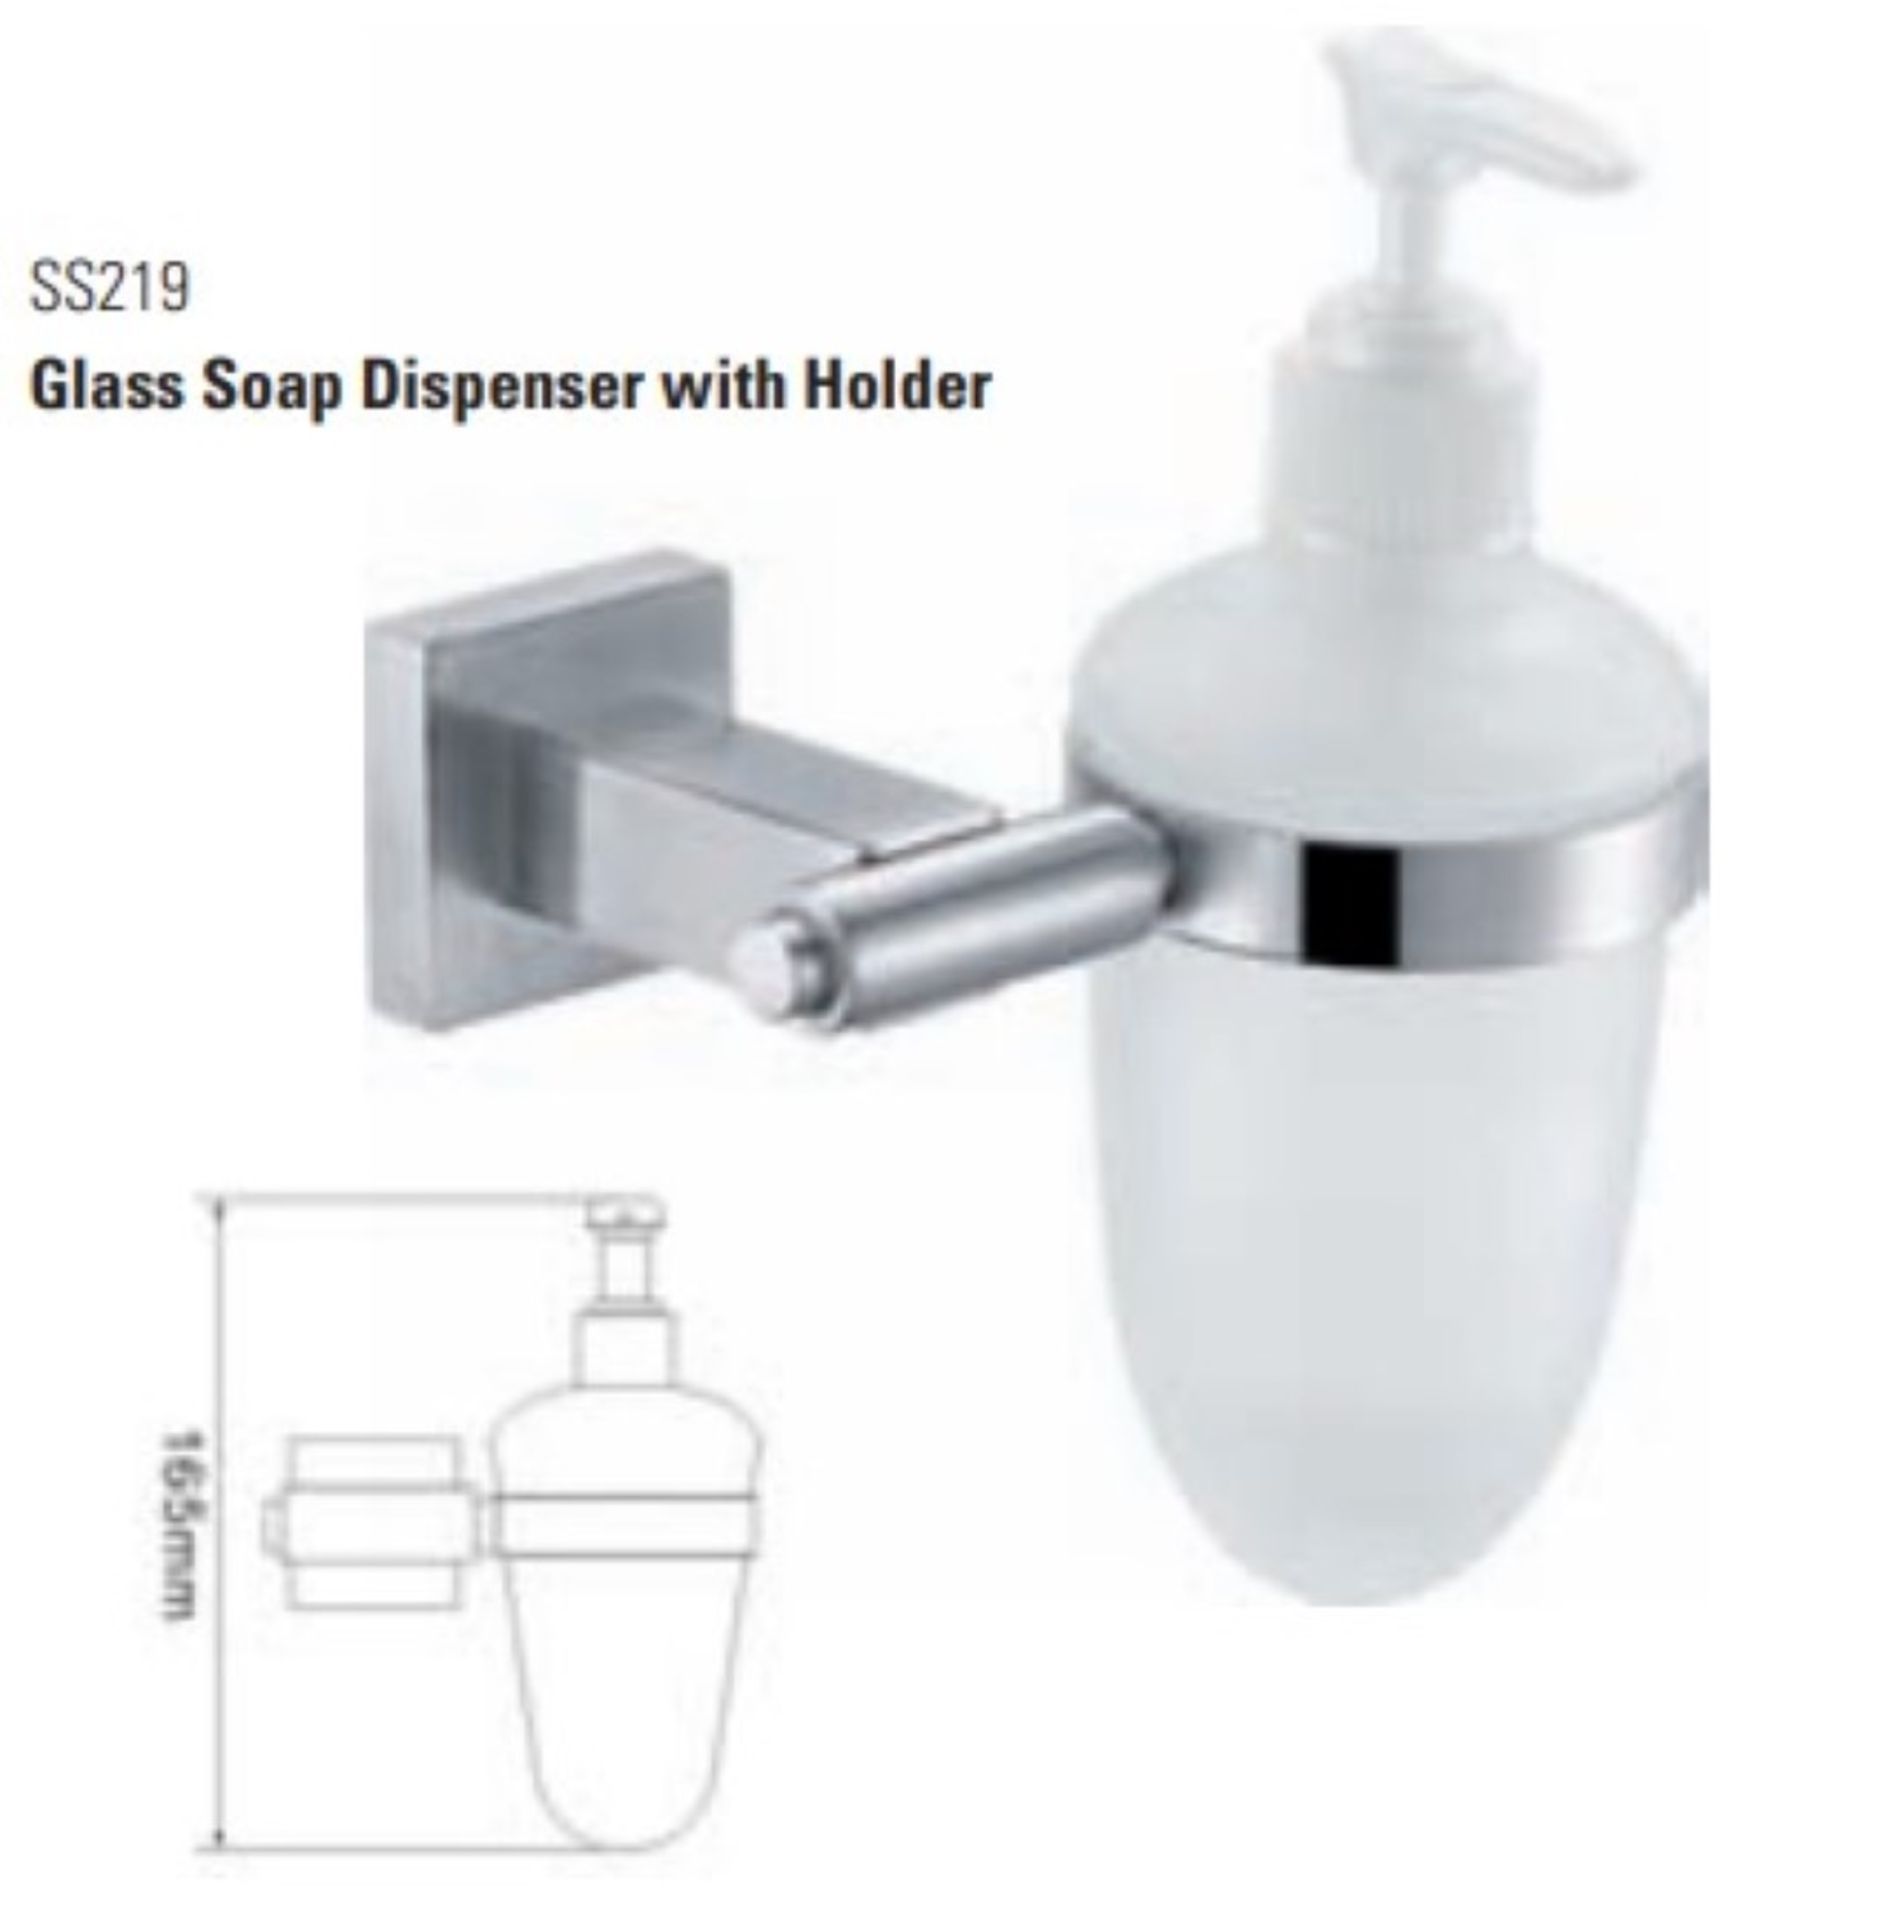 1 x Stonearth Glass Soap Dispenser With Holder - Solid Stainless Steel Bathroom Accessory - New - Image 2 of 3